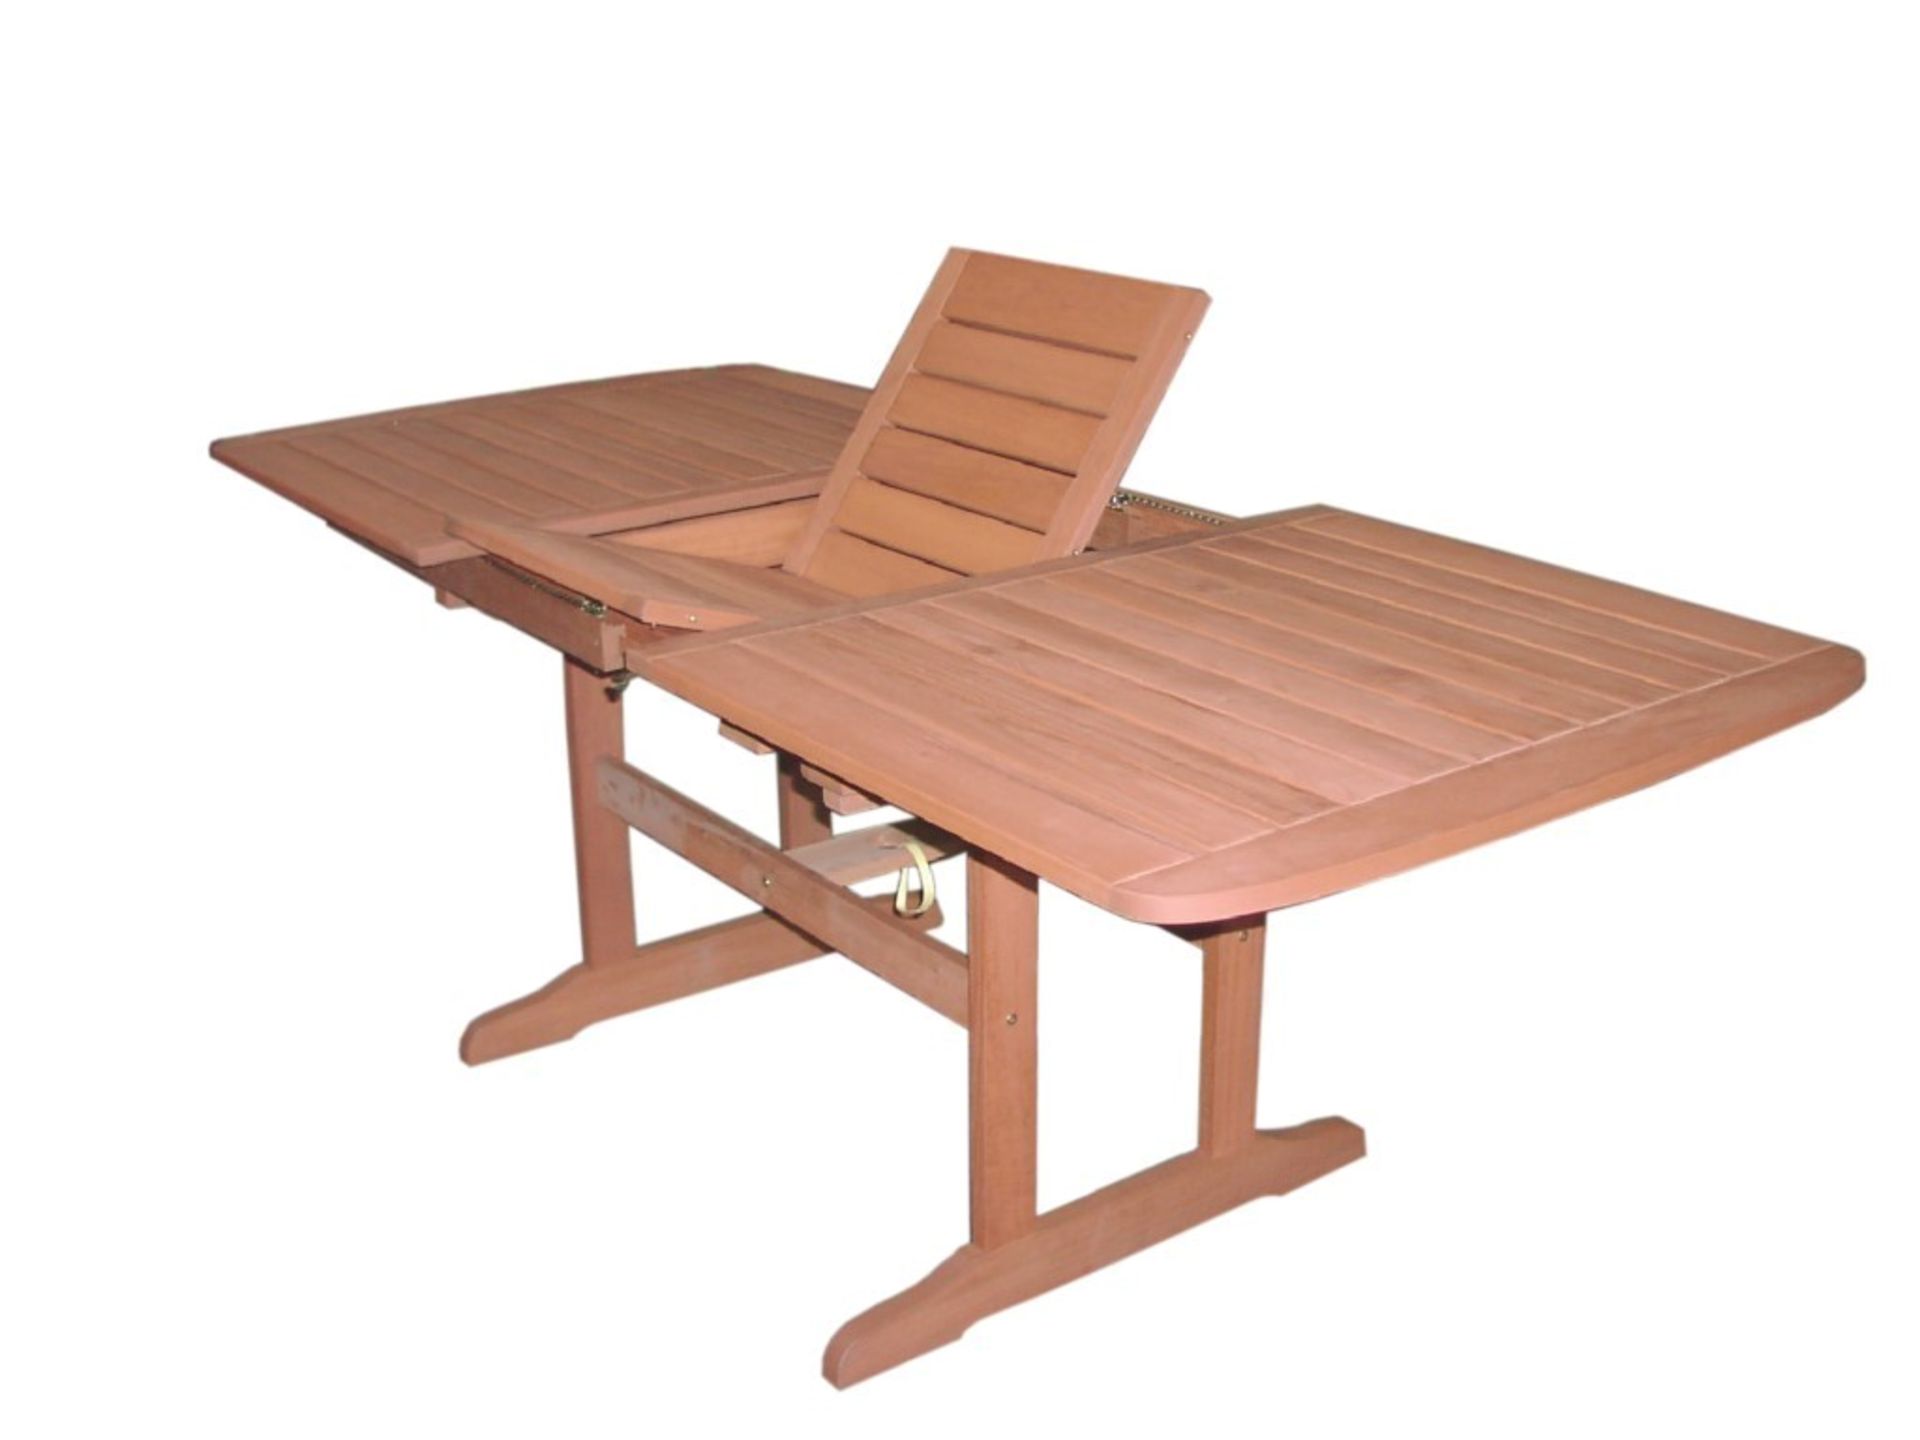 5-Piece Garden Furniture Set Includes 1 x Table Extending (Rectangular) & 4 x Armchairs - Made - Image 2 of 4